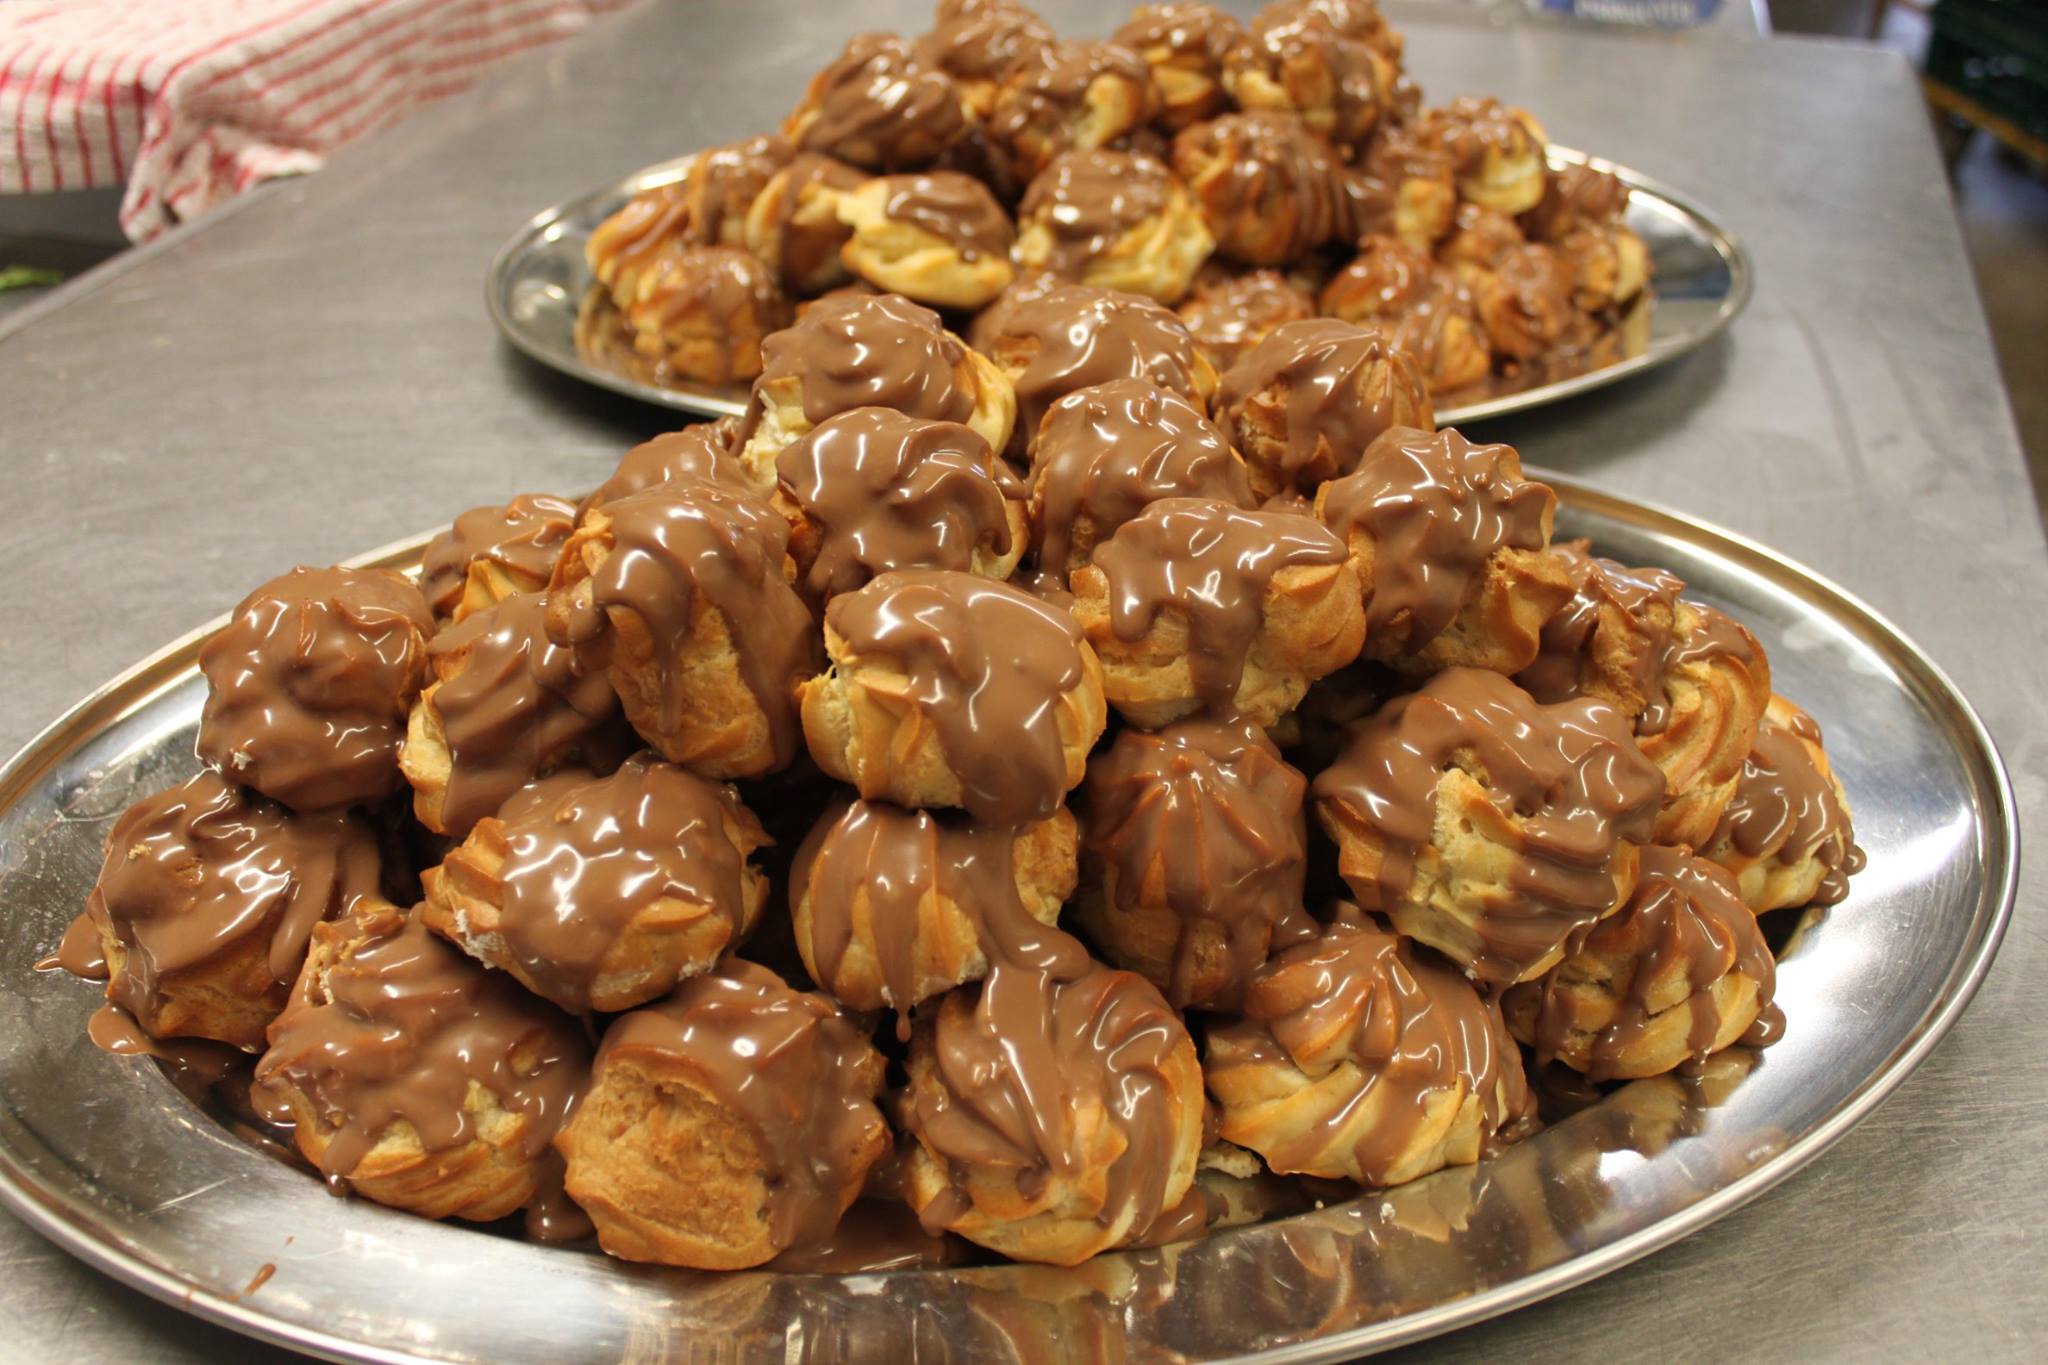 Chocolate profiteroles that will be served with fresh double cream.